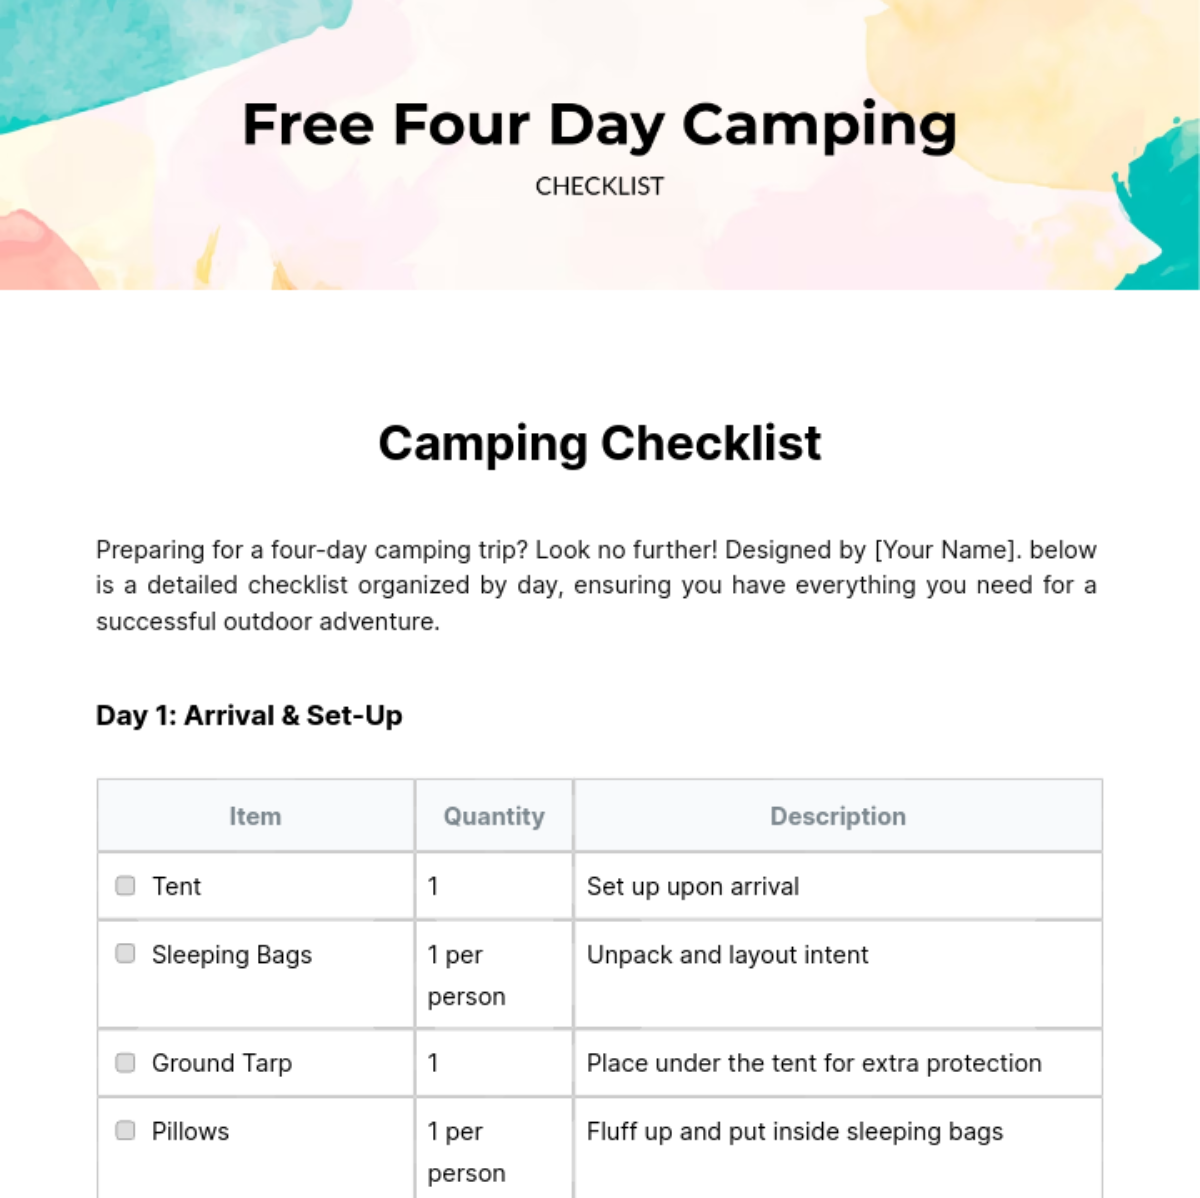 Free Four Day Camping Checklist Template